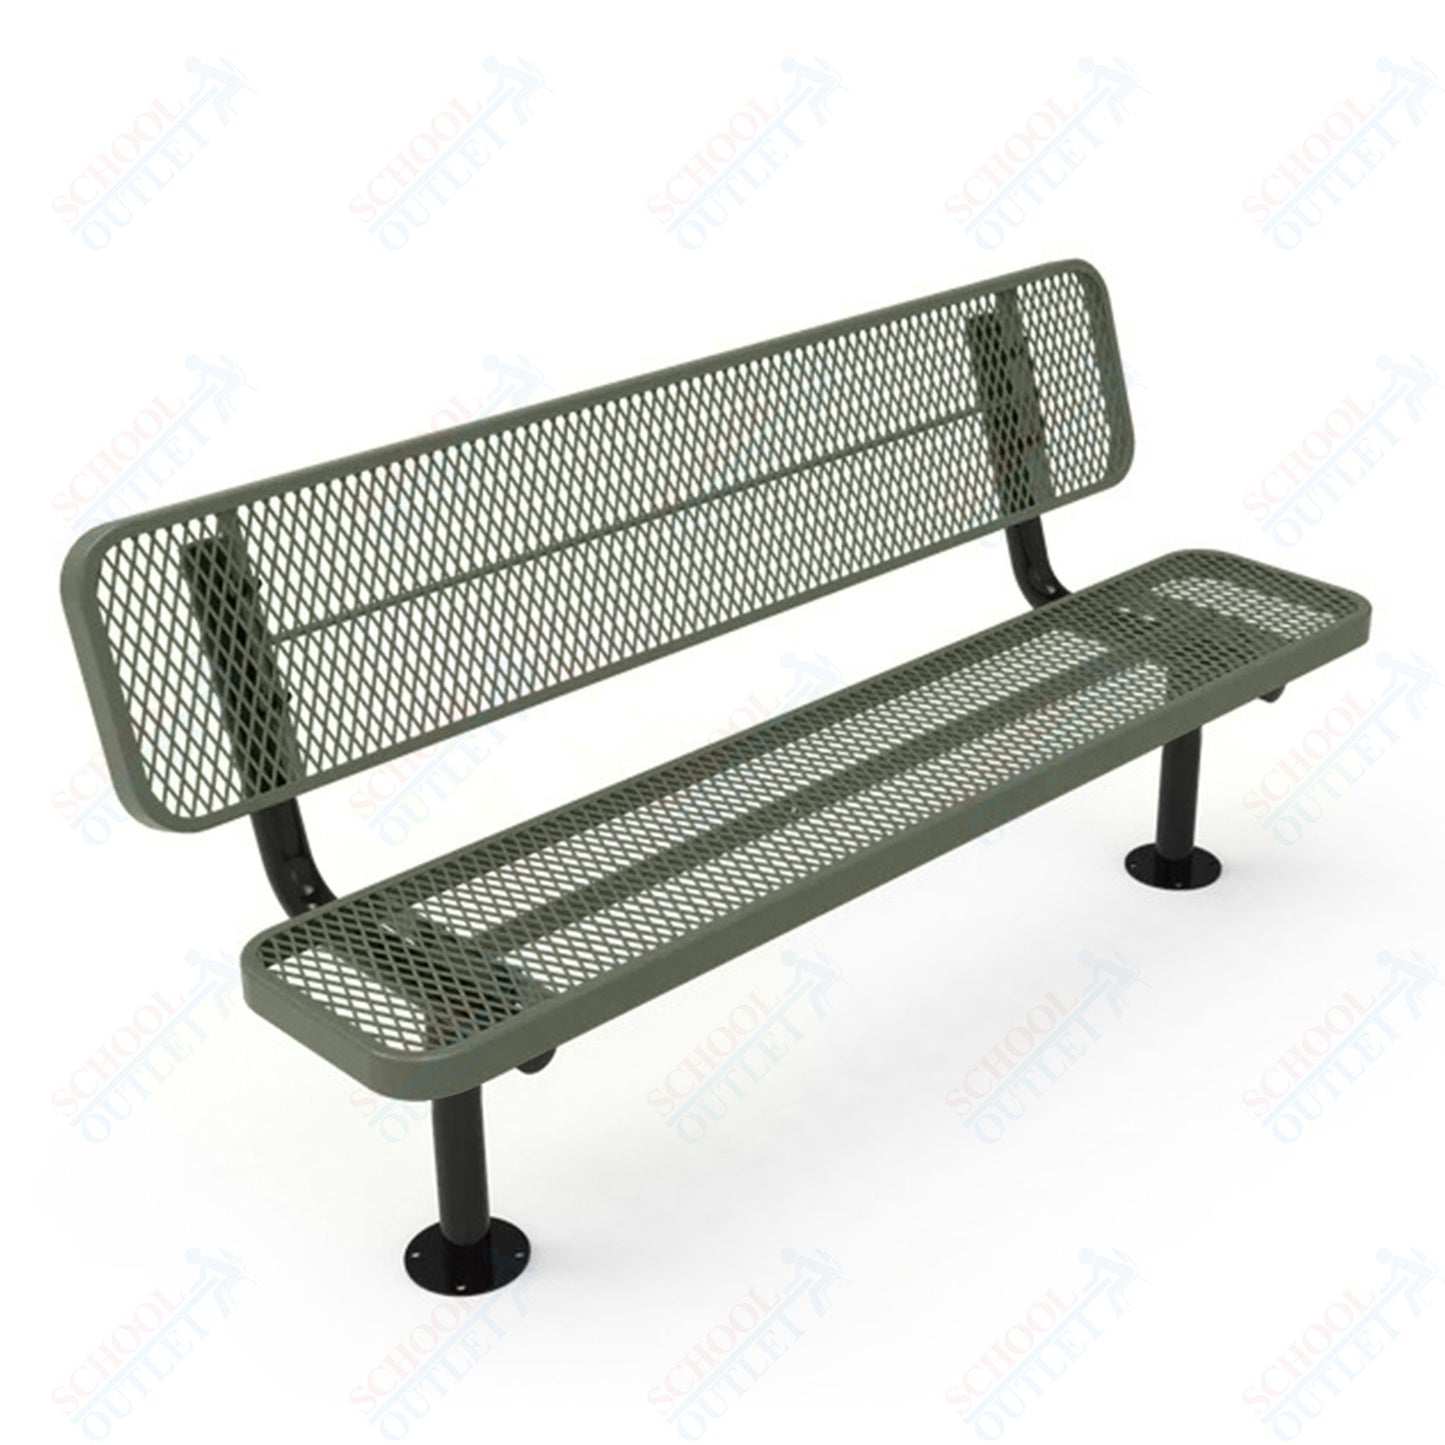 MyTcoat - Player's Outdoor Bench with Back - Surface Mount 8' L (MYT-BPY08-32)